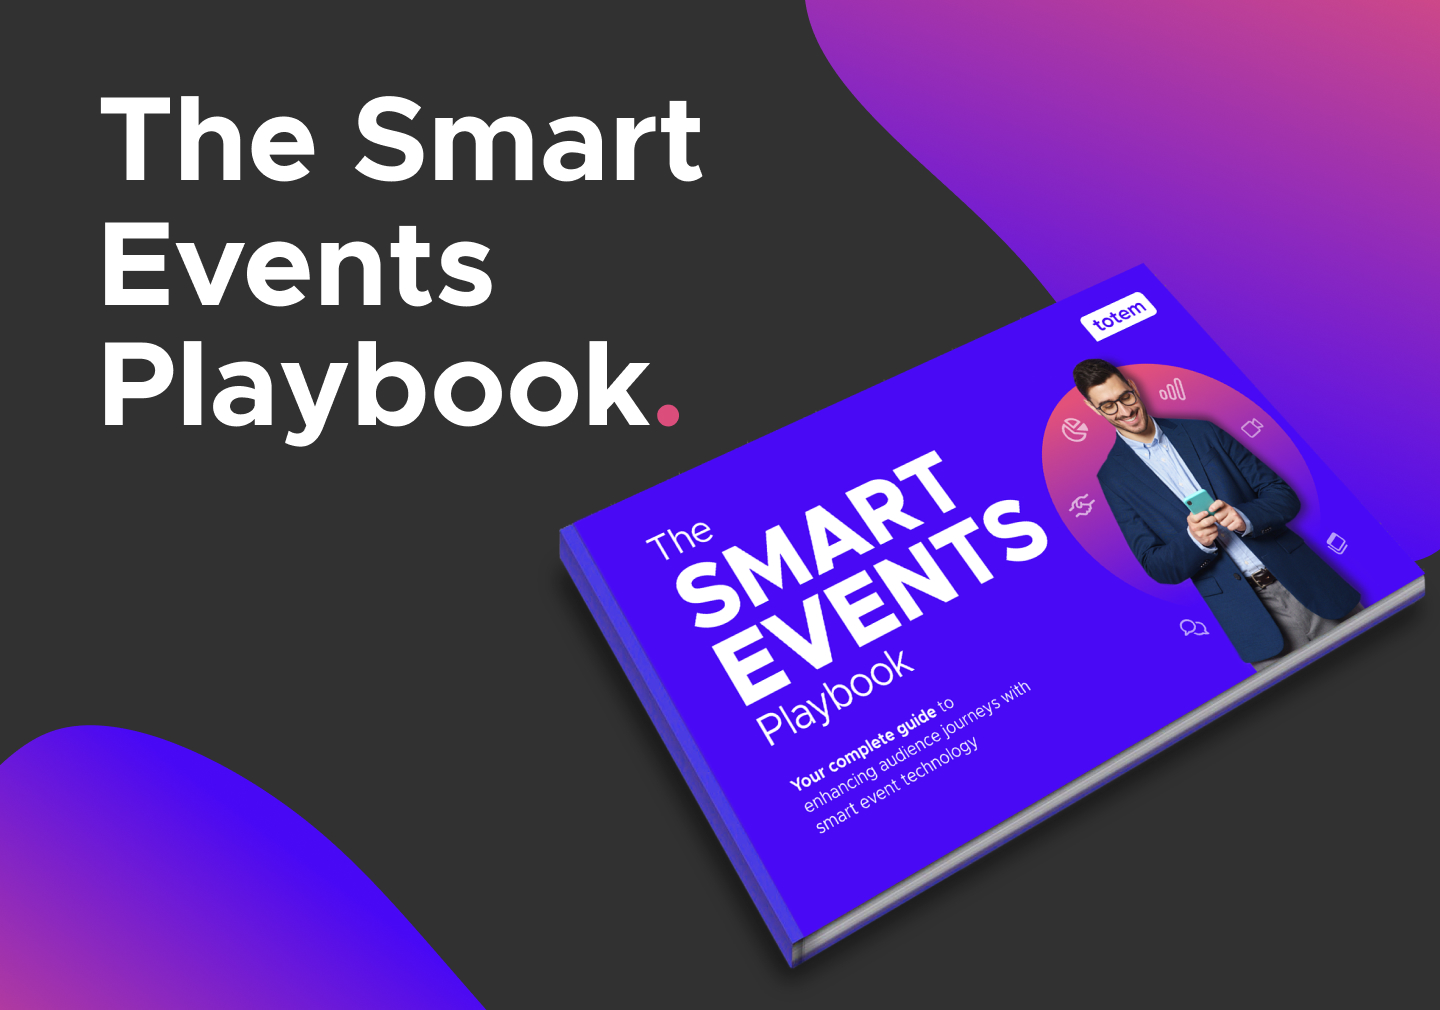 The Smart Events Playbook